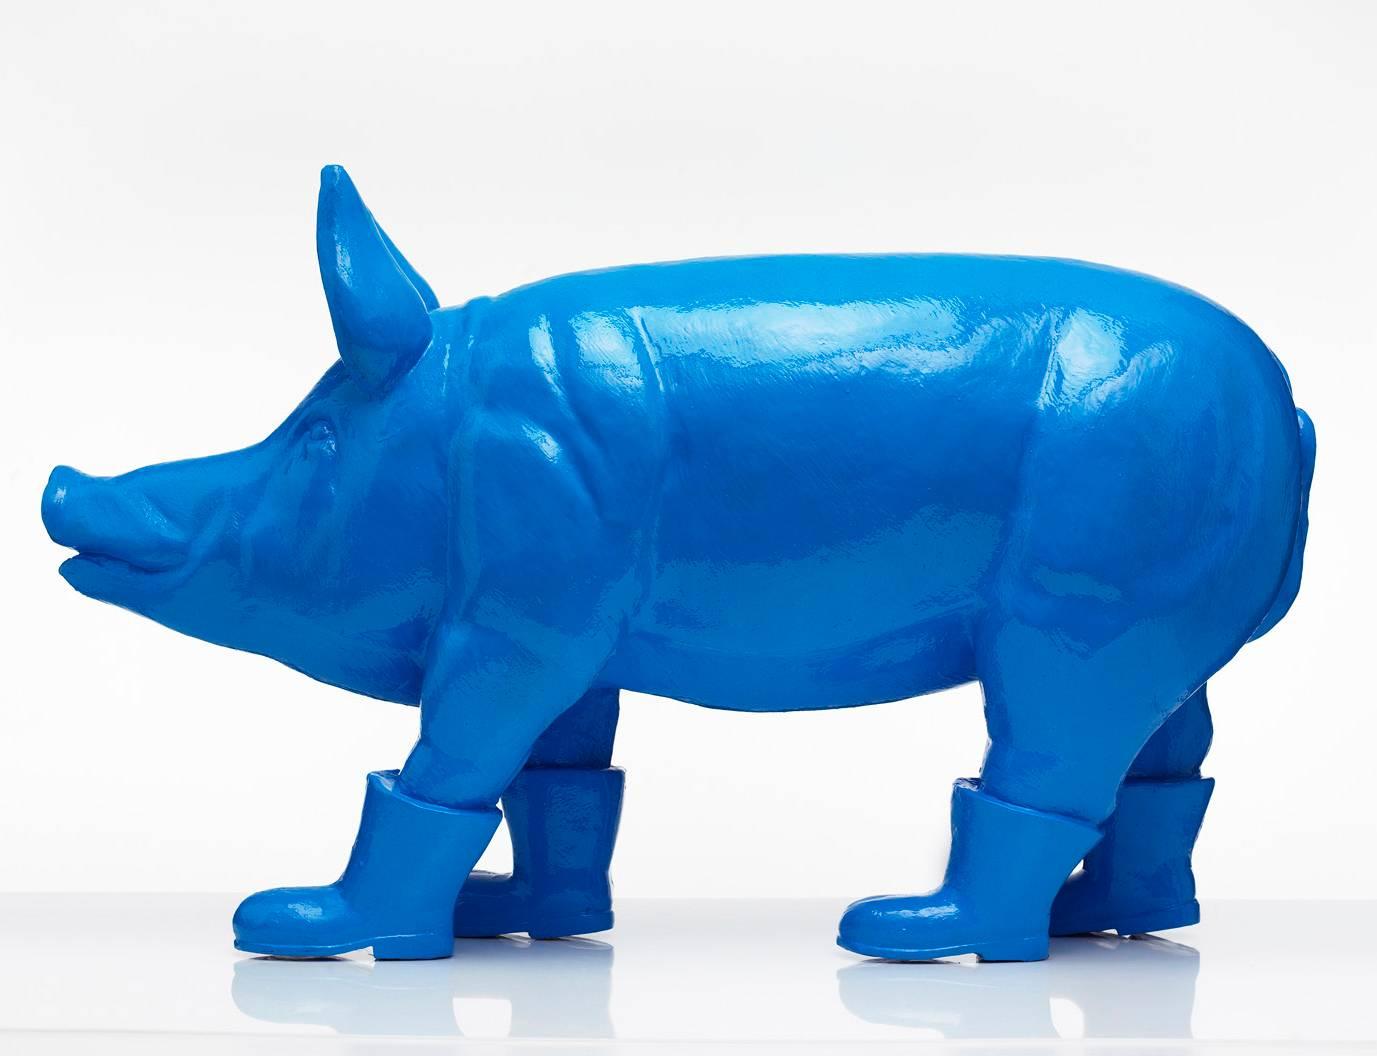 Cloned blue father pig - Sculpture by William Sweetlove